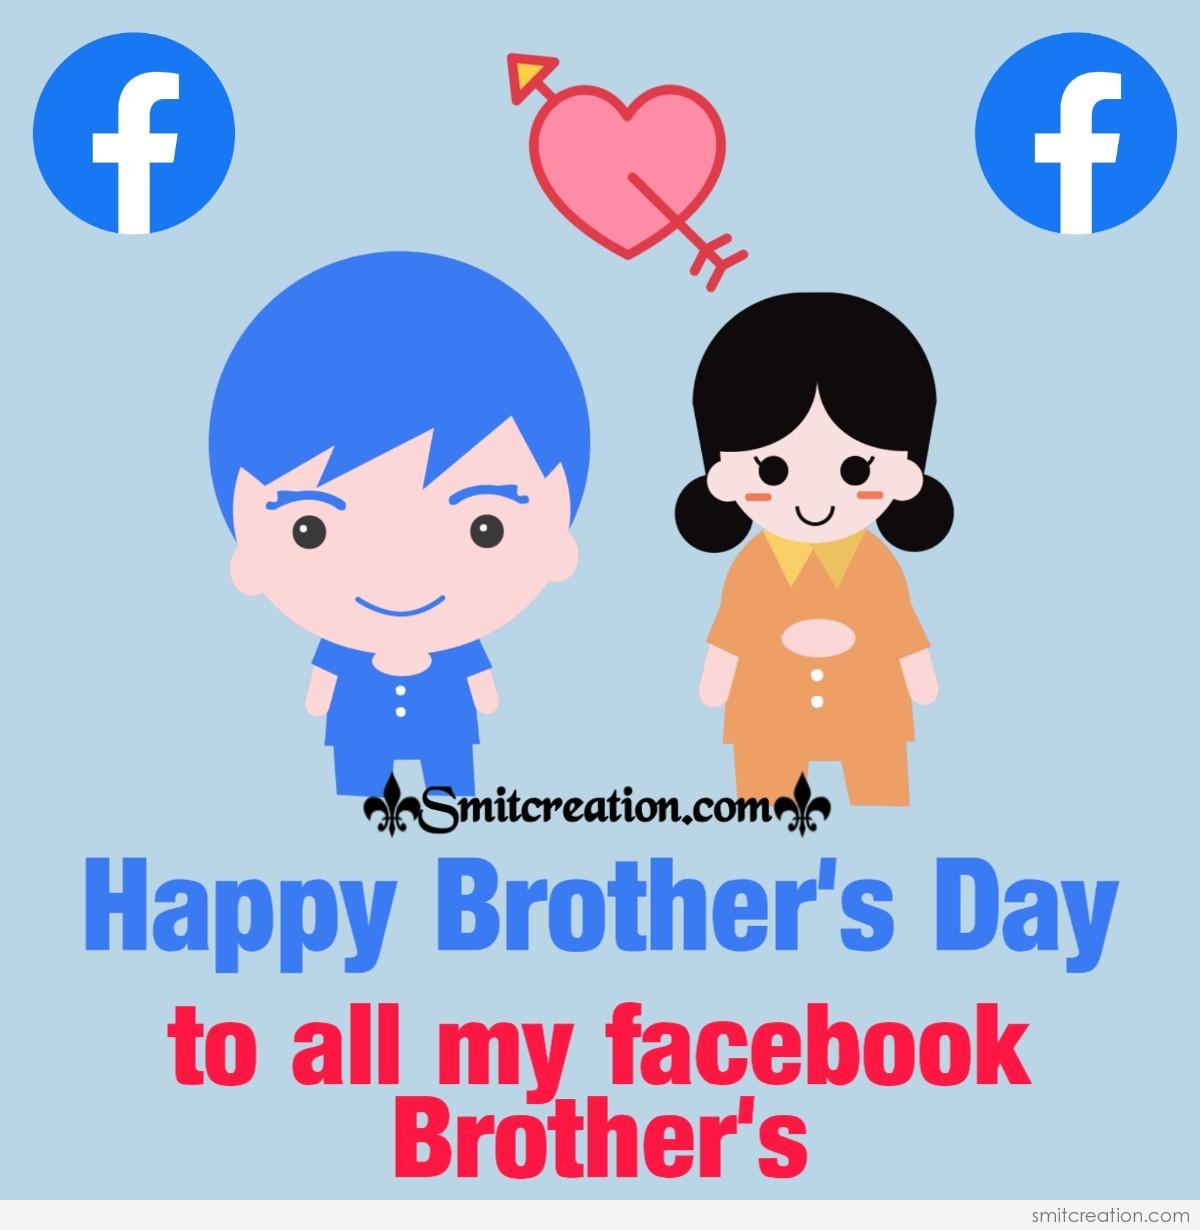 Happy Brother's Day To All My Facebook Brothers - SmitCreation.com